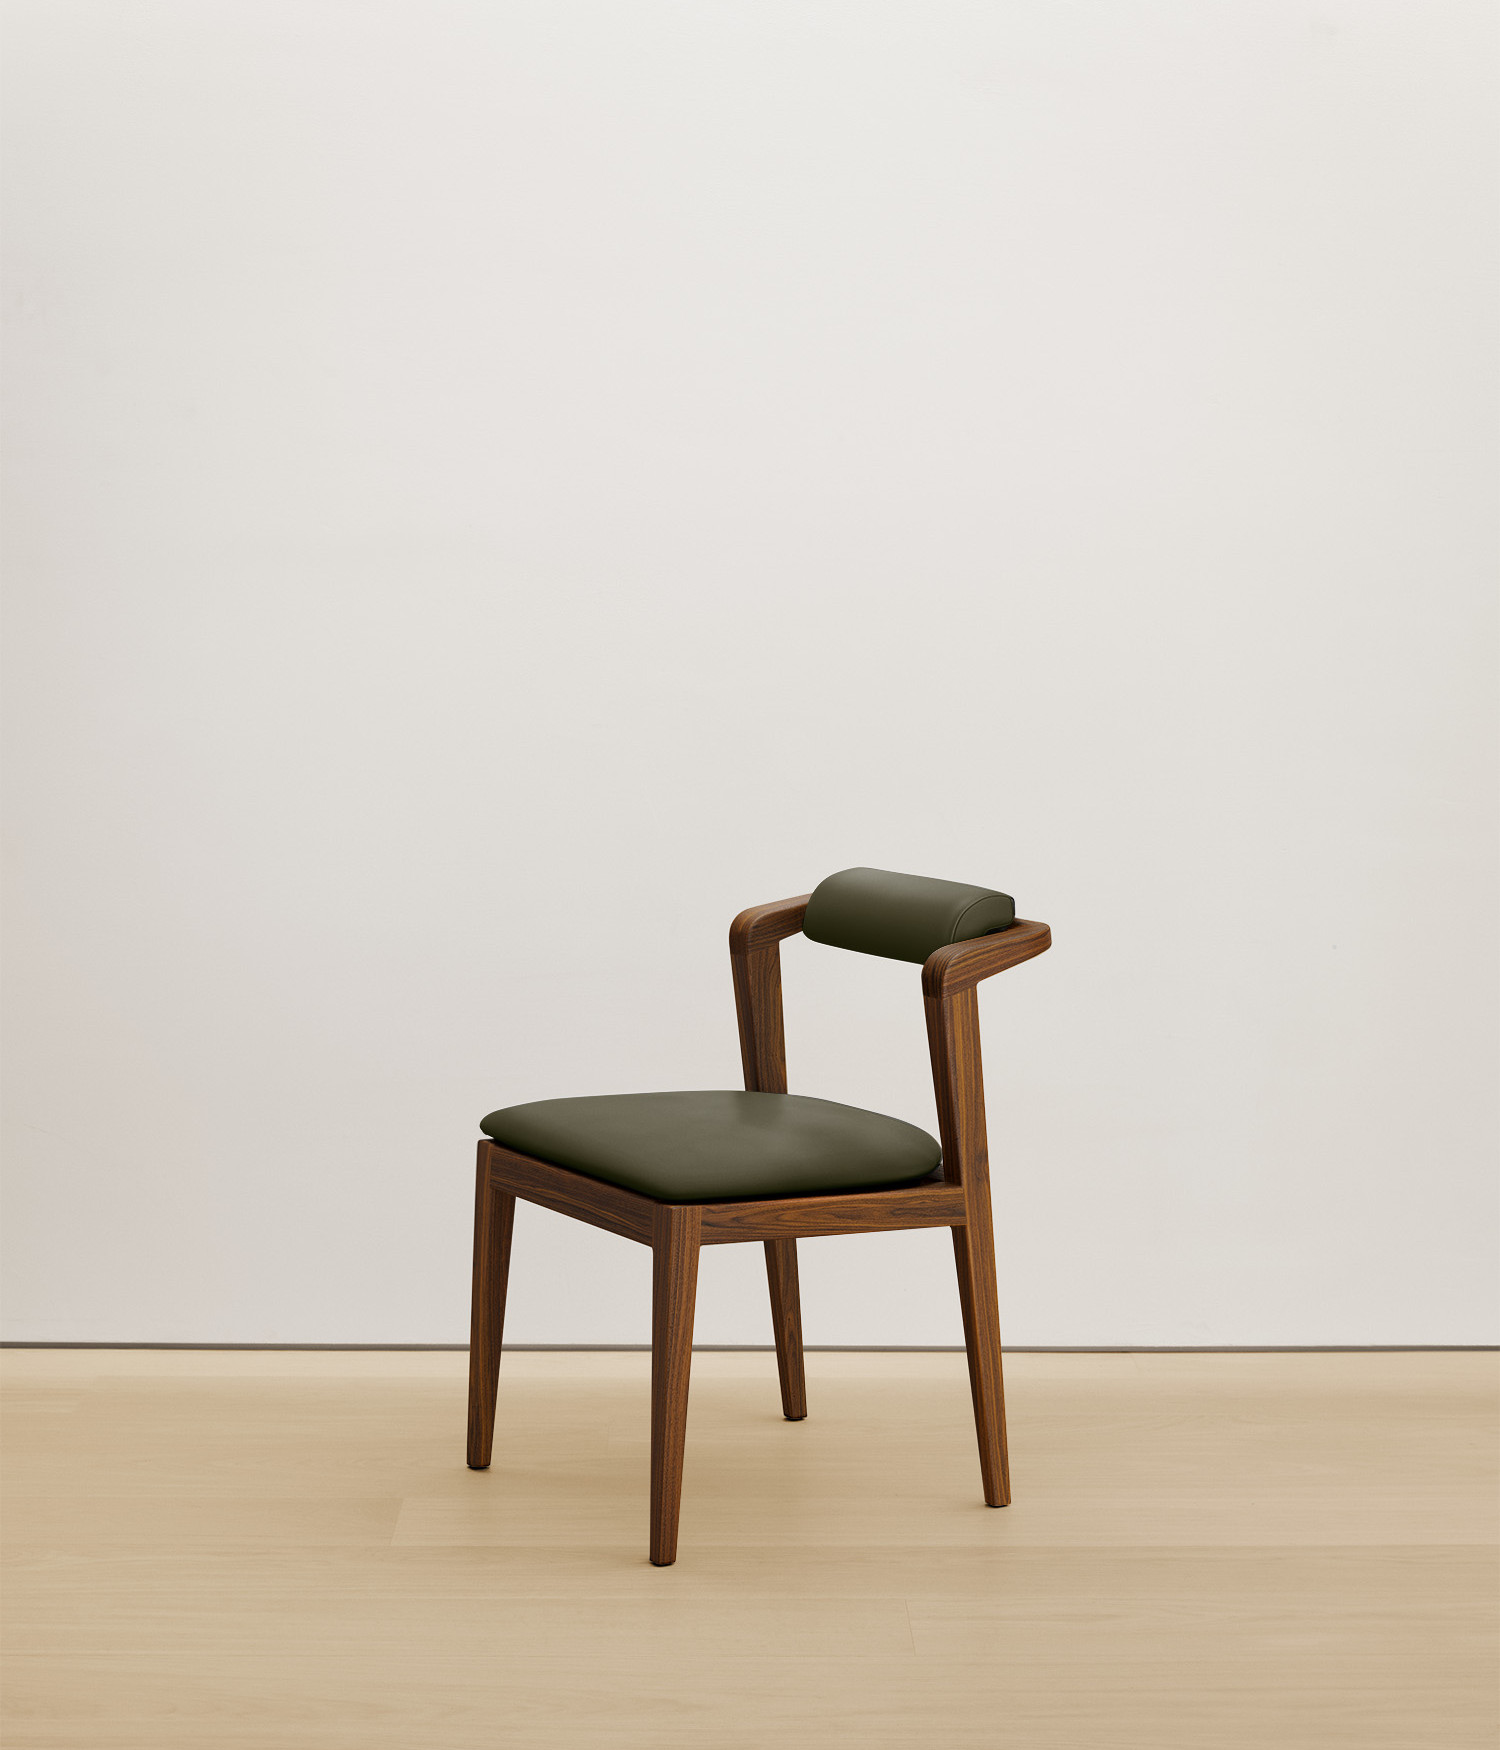  walnut chair with forest color upholstered seat